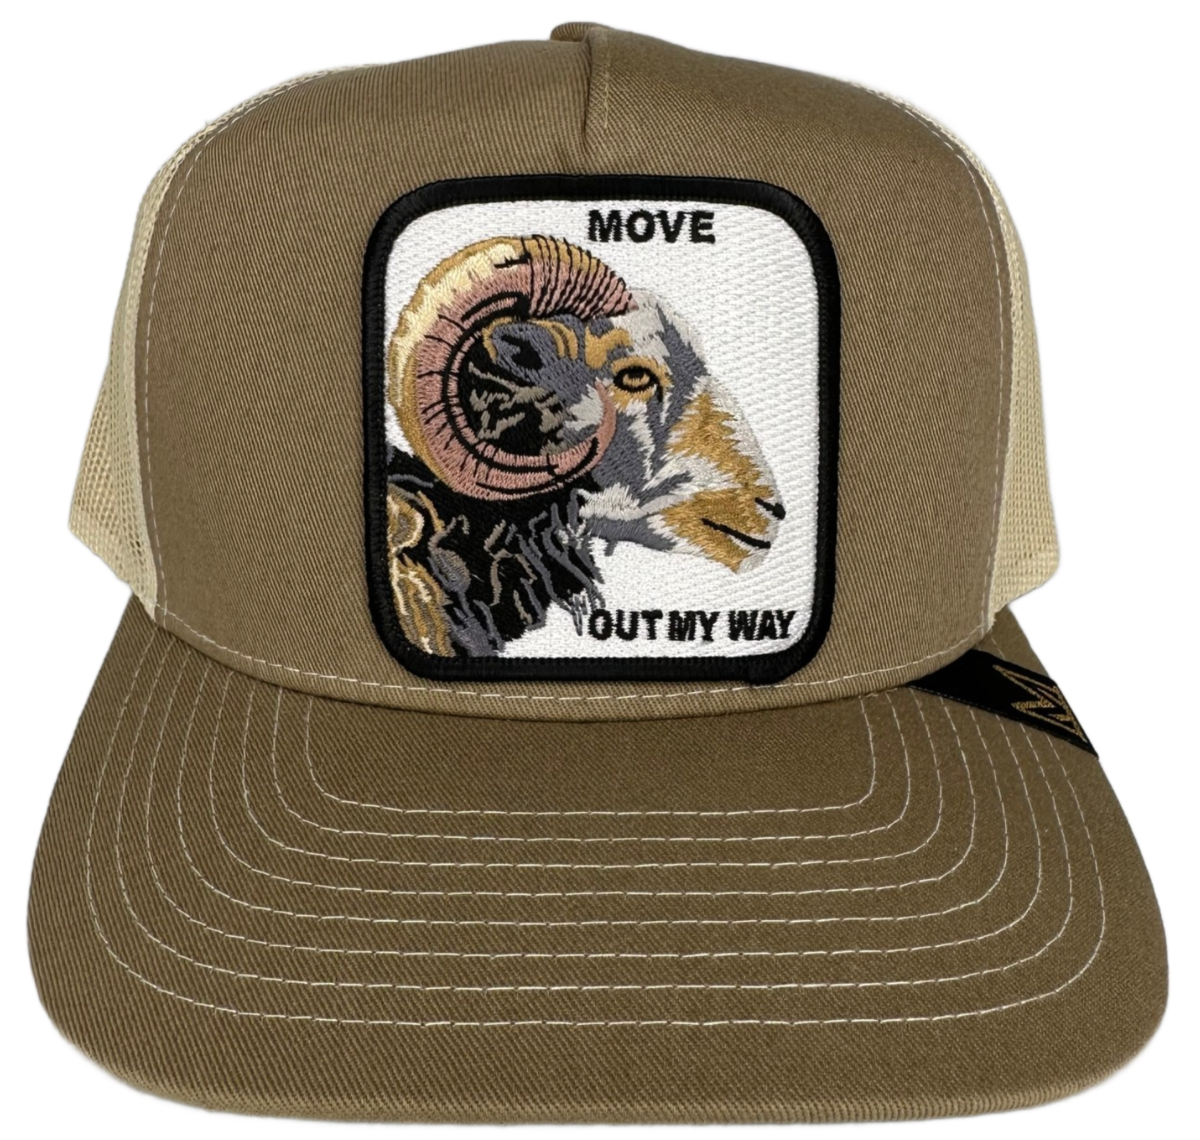 MV Dad Hats - Move Out My Way Trucker Hat - Khaki/Off White